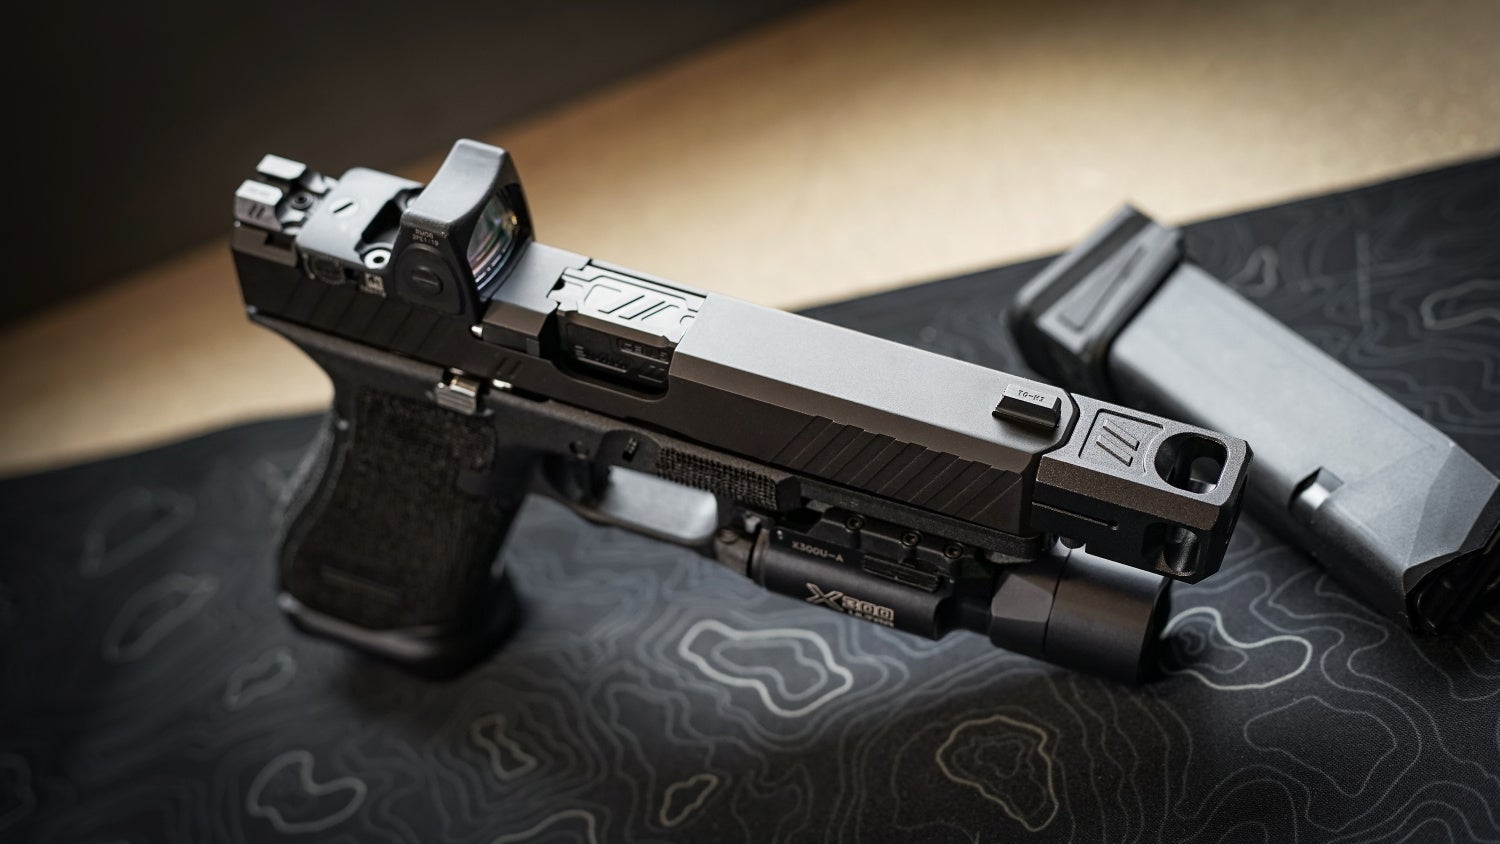 ZEV Technologies Releases New Glock, SIG, and AR-15 Accessories